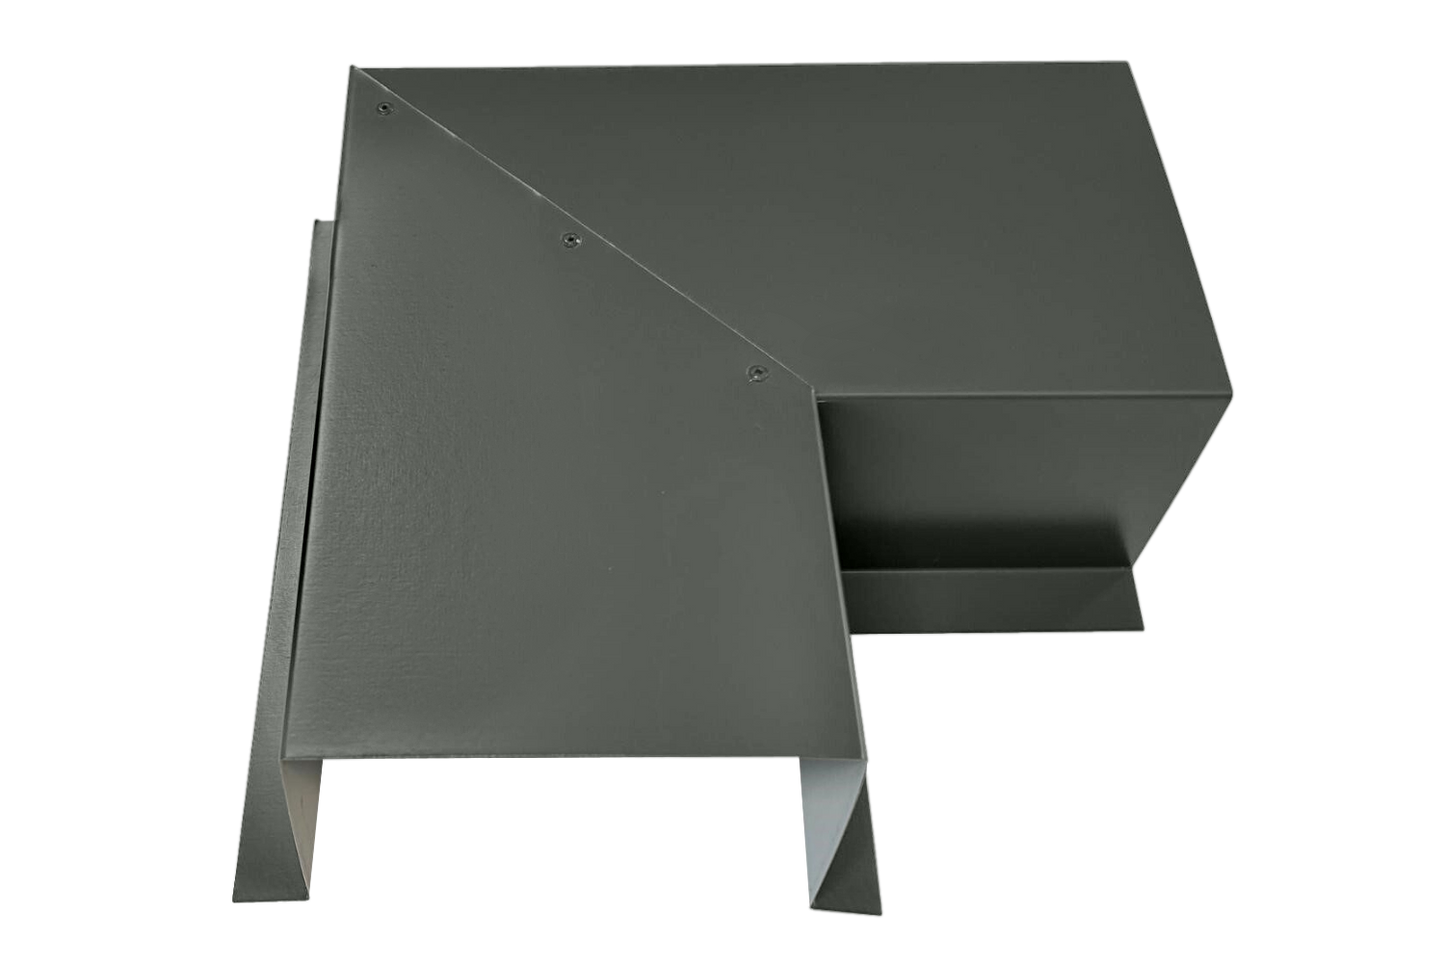 A gray, angular metal object made from premium quality 24 gauge steel features overlapping rectangular and triangular sections, forming a geometric, abstract 3D shape. The surface appears smooth and matte. The Perma Cover Commercial Series - 24 Gauge Line Set Cover Side Turning Elbows - Premium Quality has sharp, clean edges and seems to be industrially designed for easy installation.